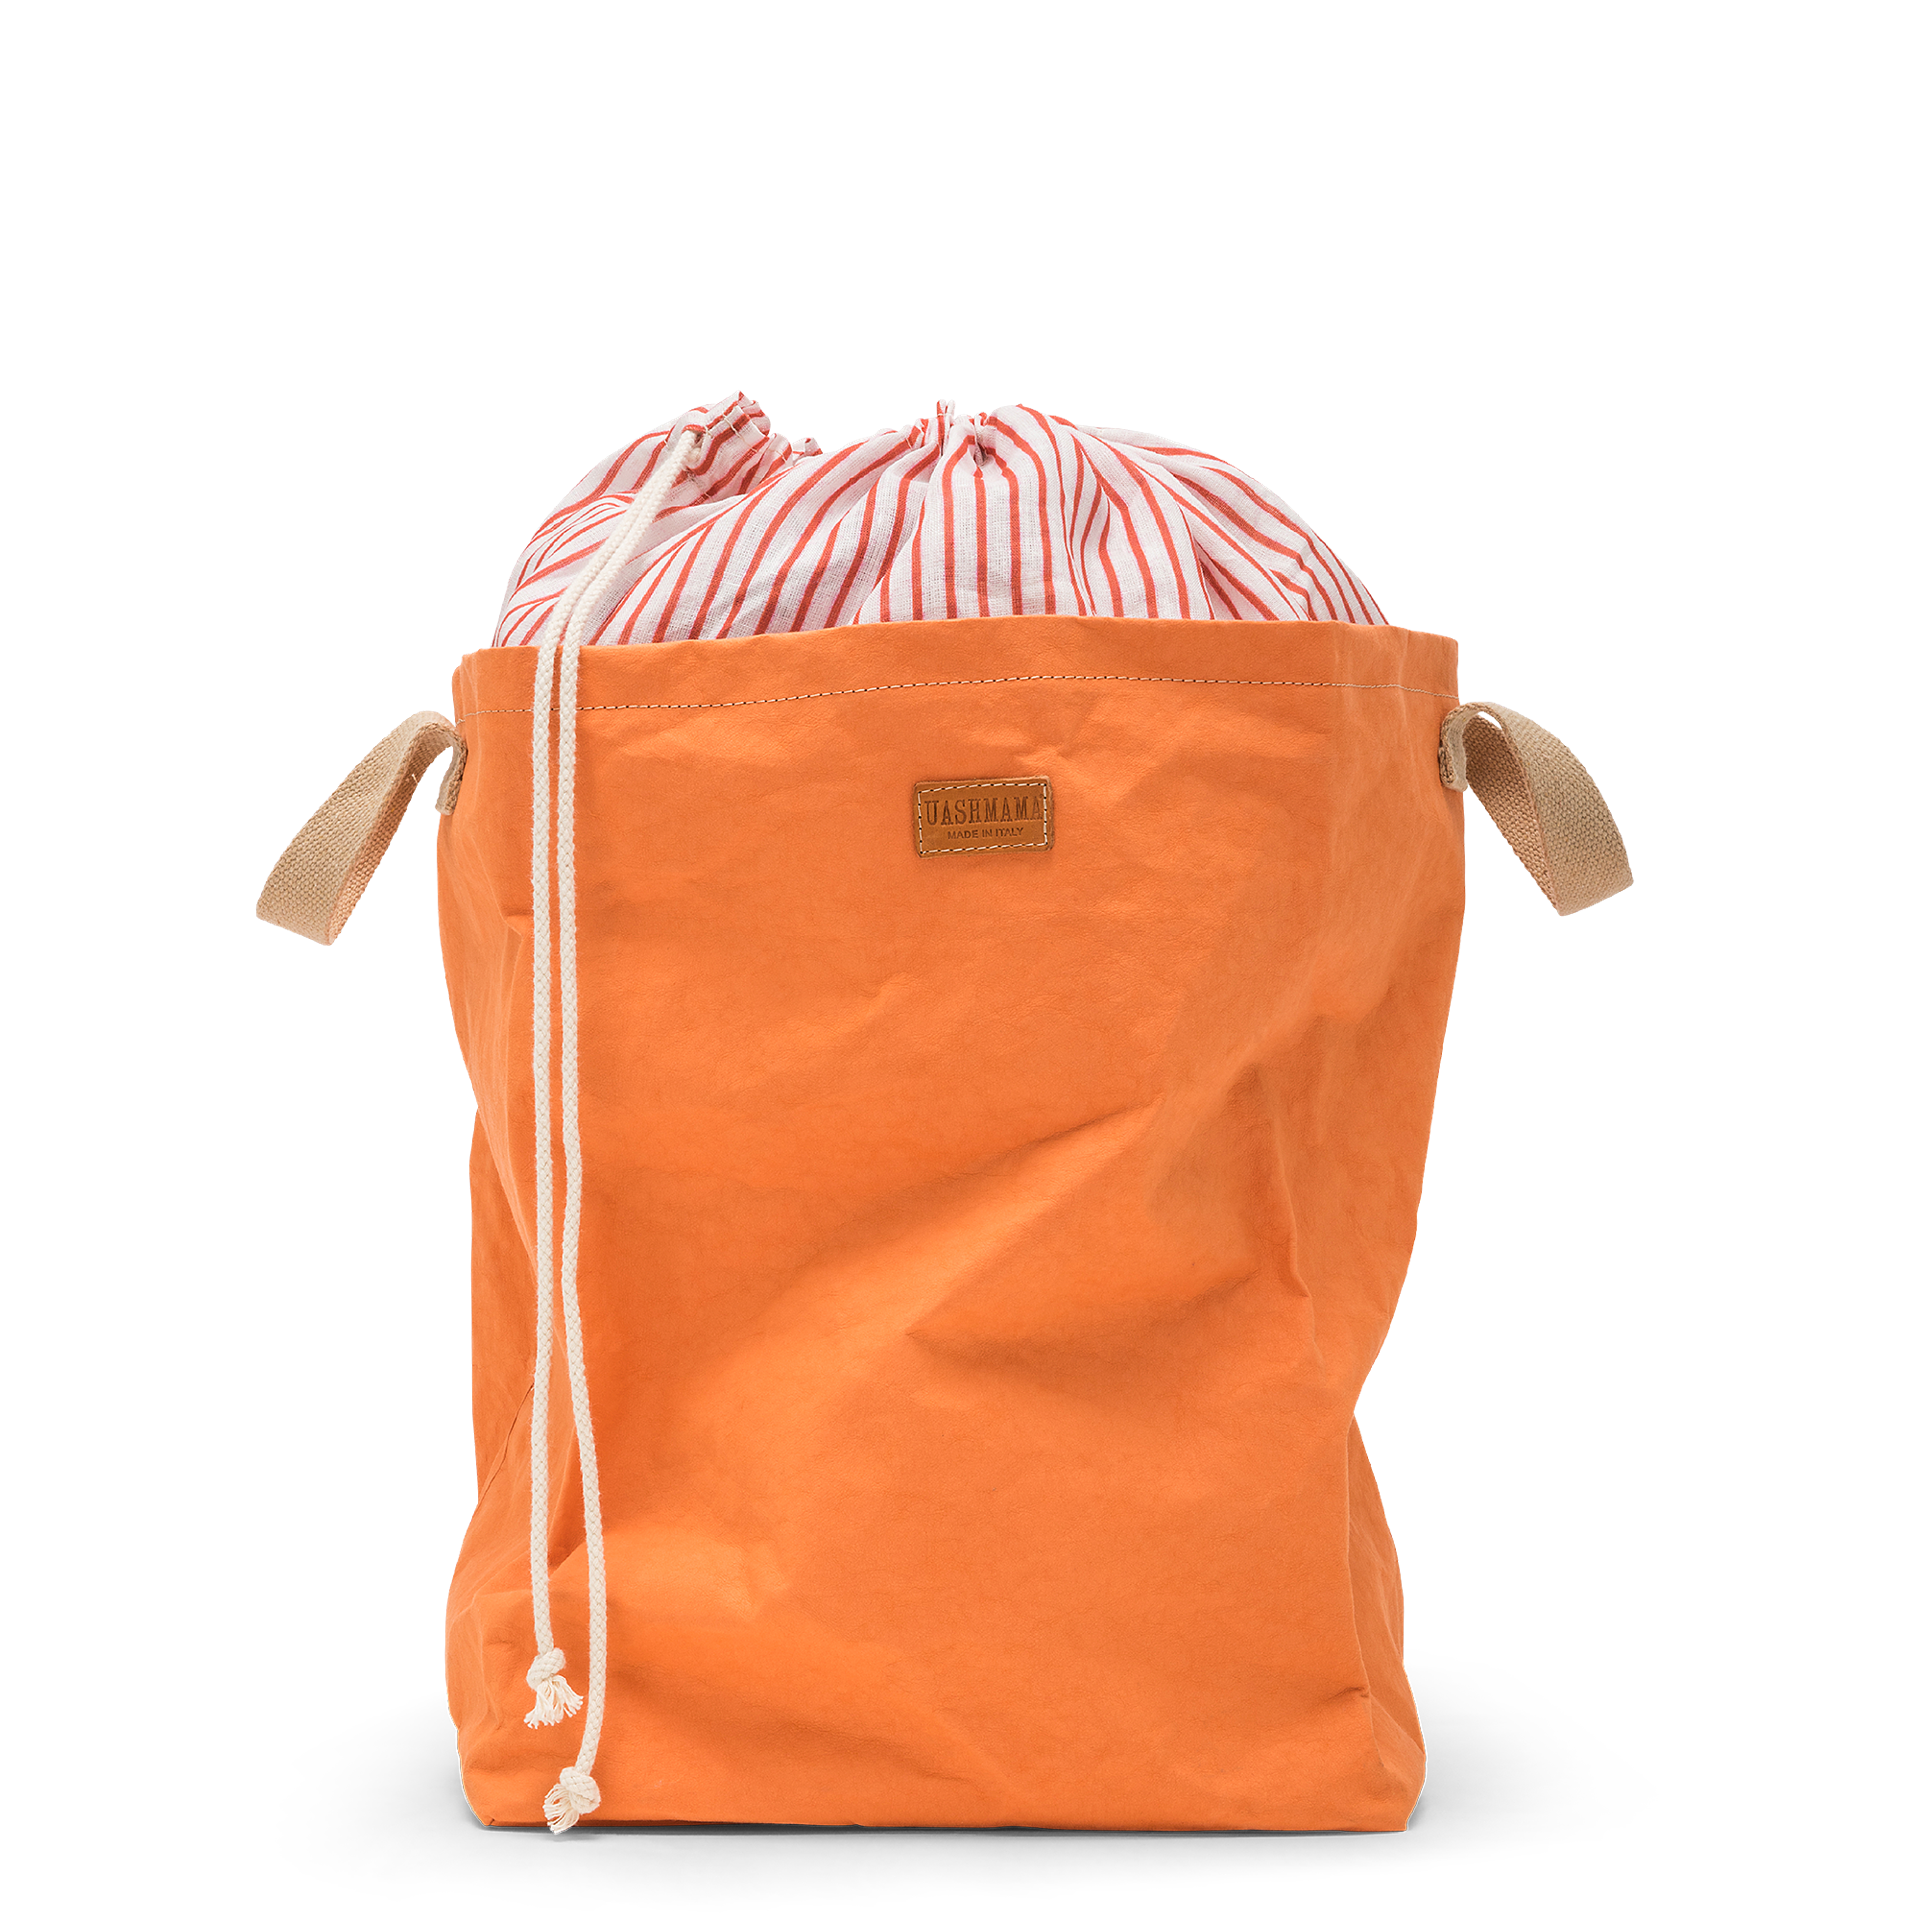 Recycled Plastic Tall Striped Bag - Orange & Blue with Orange Handle